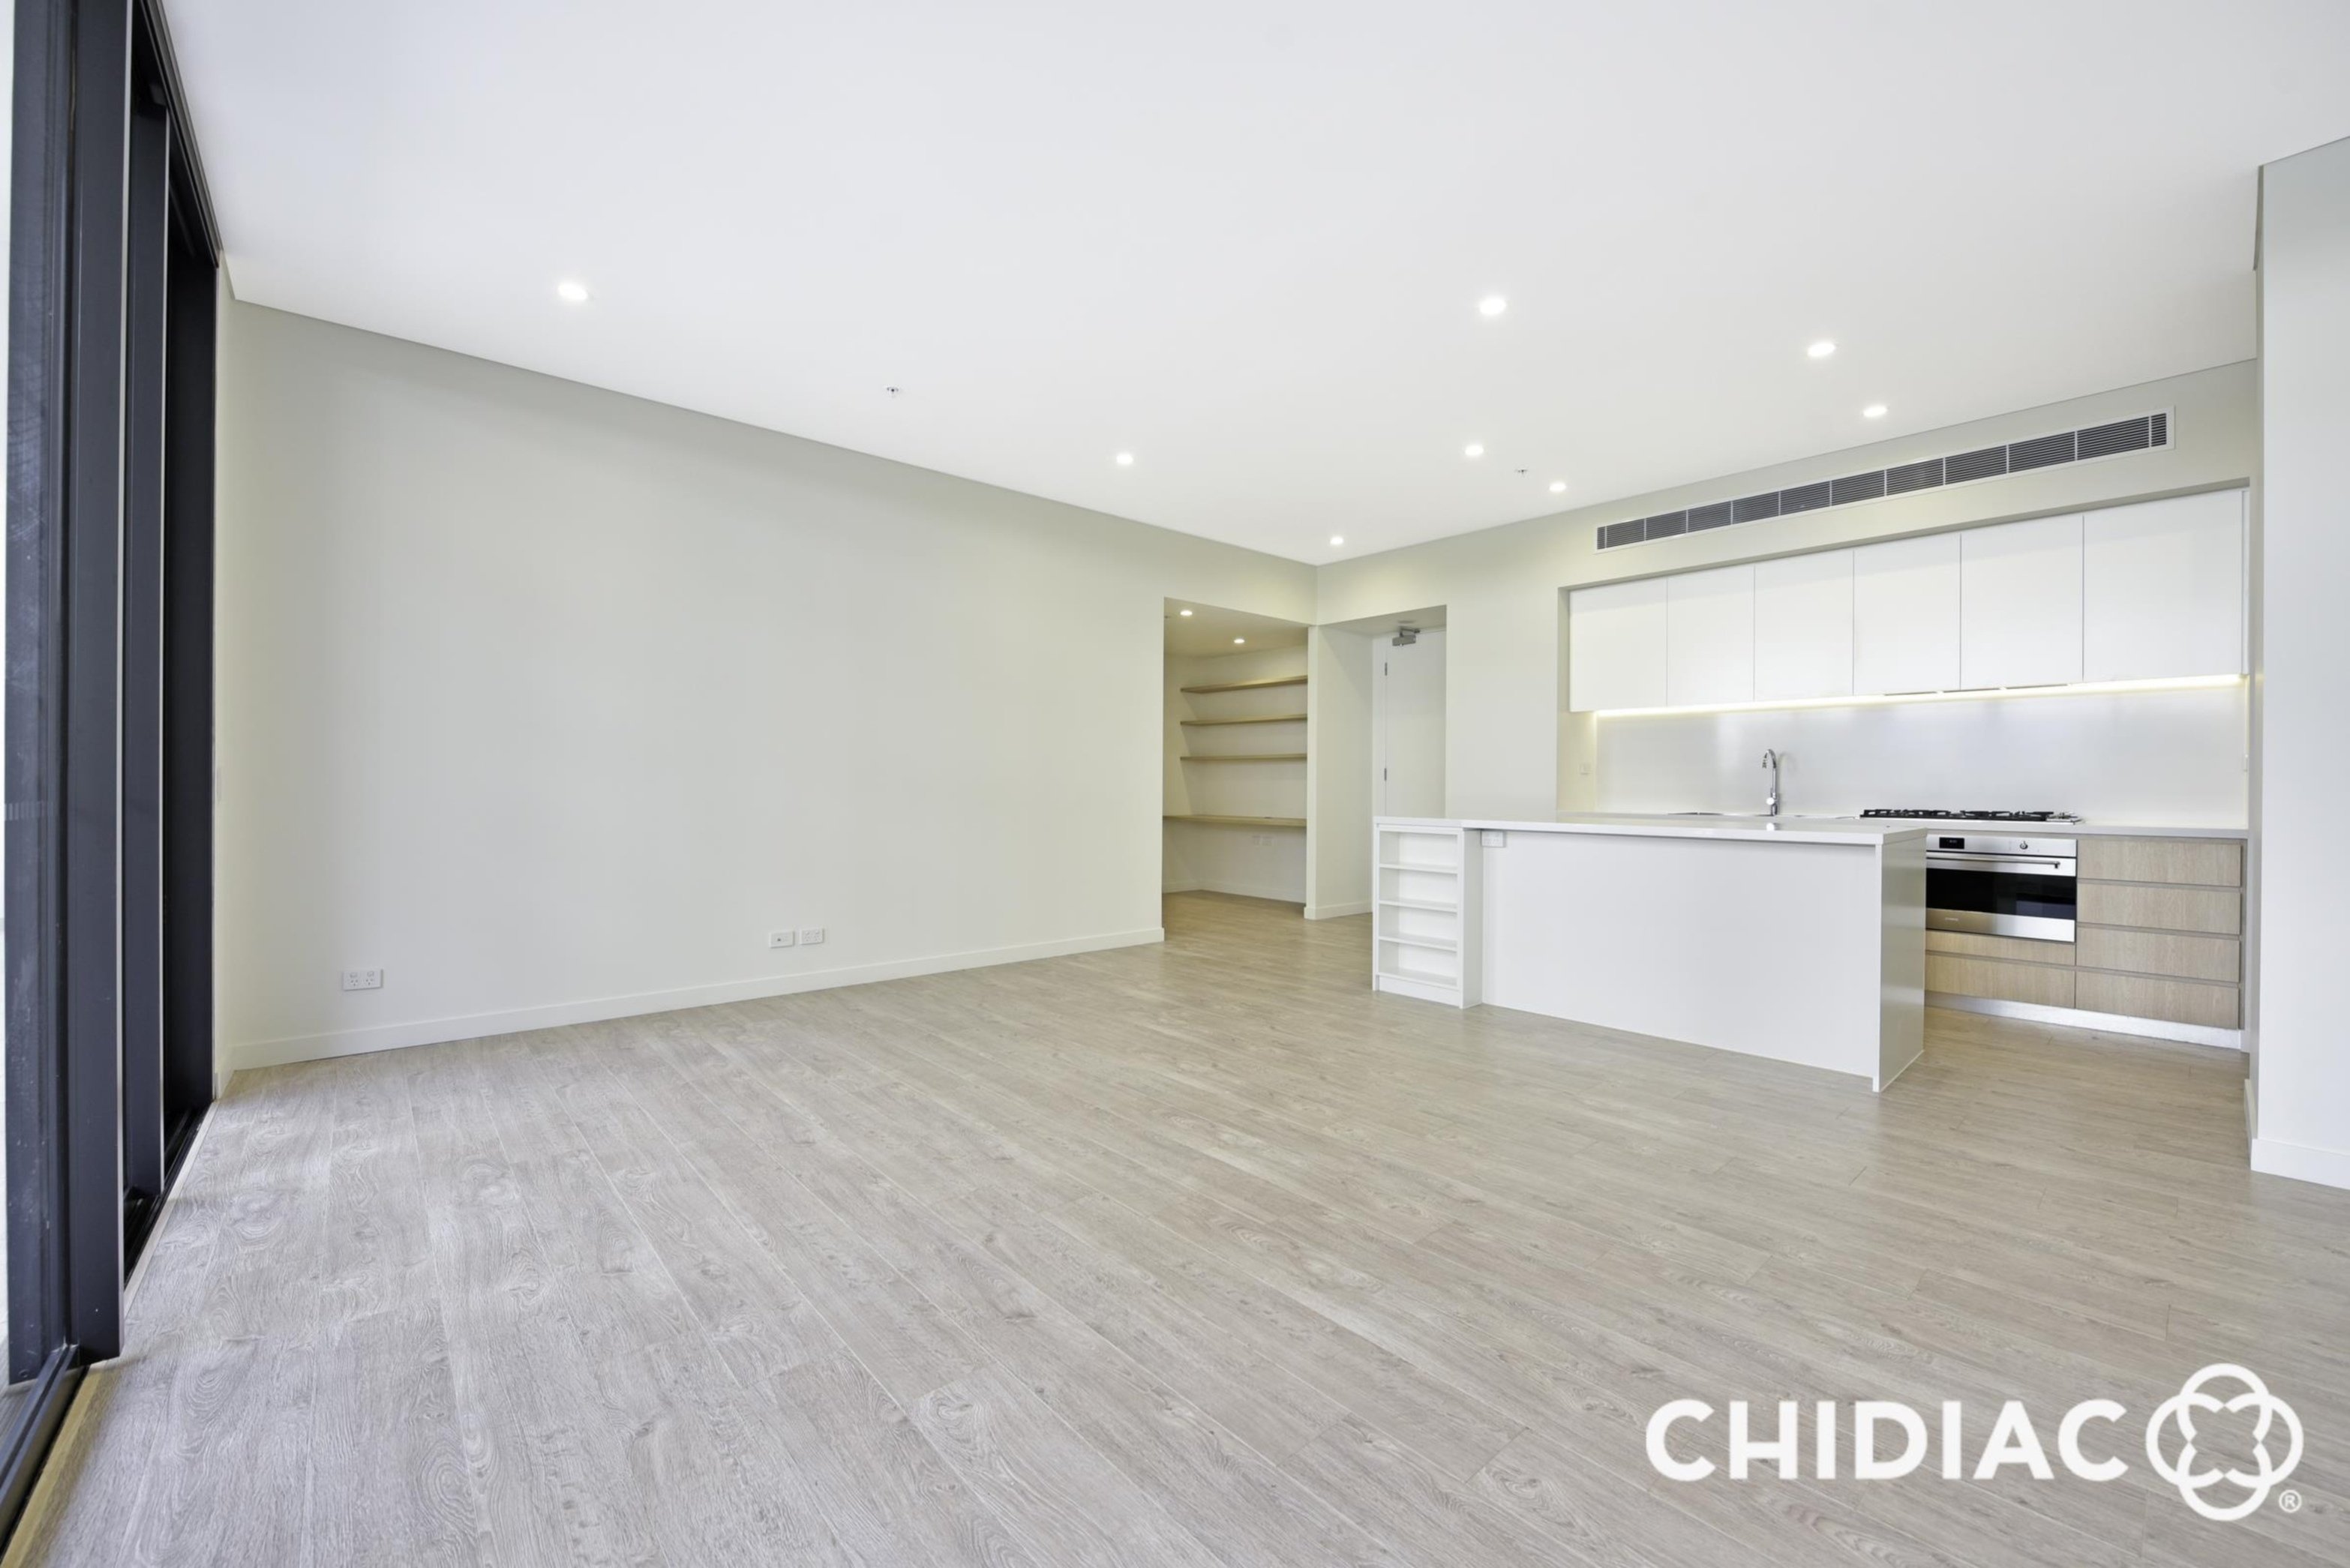 G18/1 Kingfisher Street, Lidcombe Leased by Chidiac Realty - image 1